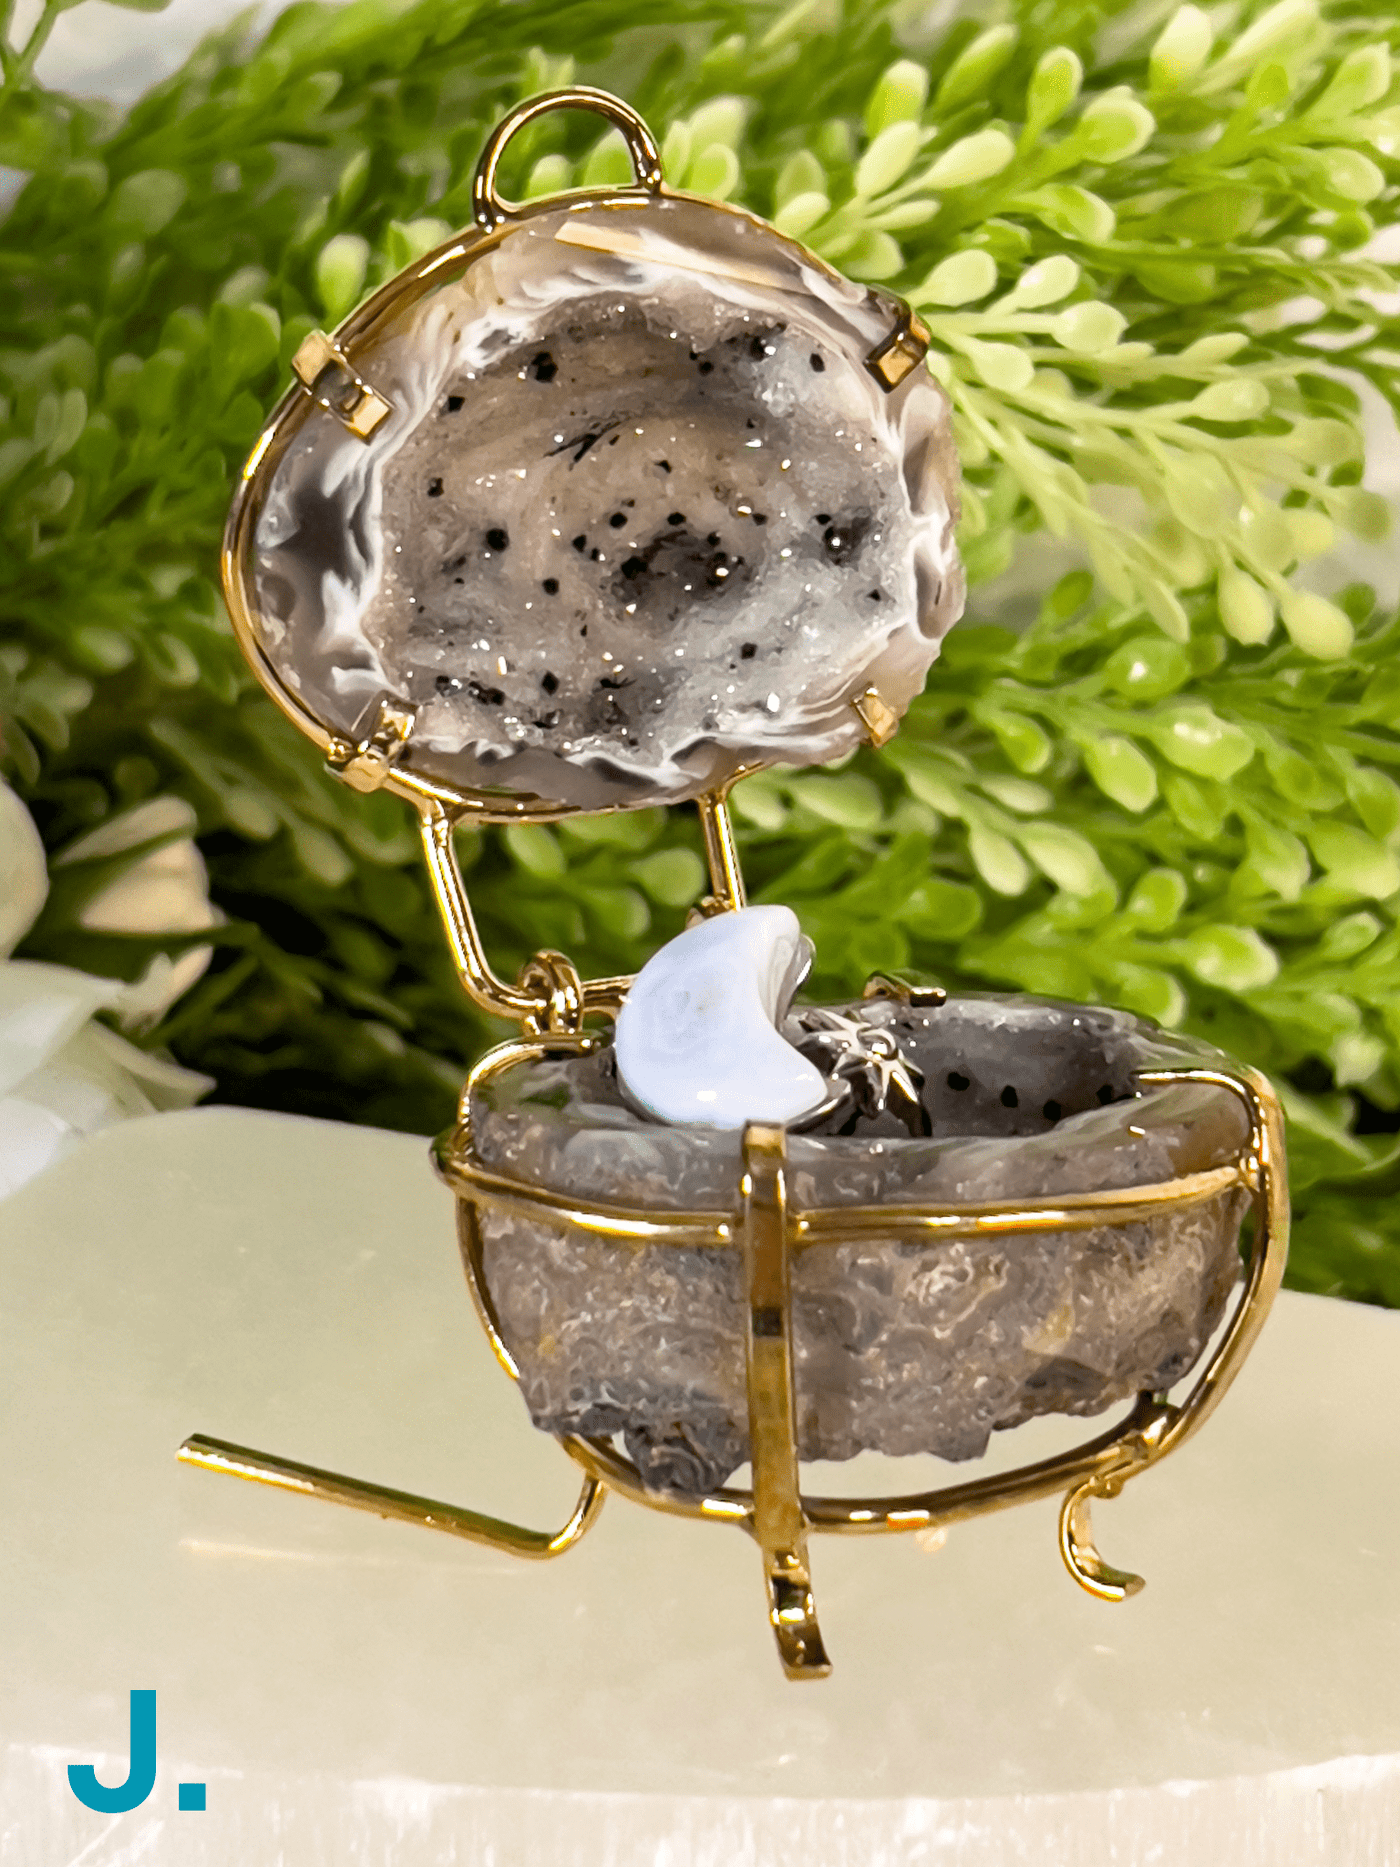 GEODE TRINKET / RING  HOLDER Revive In Style Vintage Furniture Painted Refinished Redesign Beautiful One of a Kind Artistic Antique Unique Home Decor Interior Design French Country Shabby Chic Cottage Farmhouse Grandmillenial Coastal Chalk Paint Metallic Glam Eclectic Quality Dovetailed Rustic Furniture Painter Pinterest Bedroom Living Room Entryway Kitchen Home Trends House Styles Decorating ideas